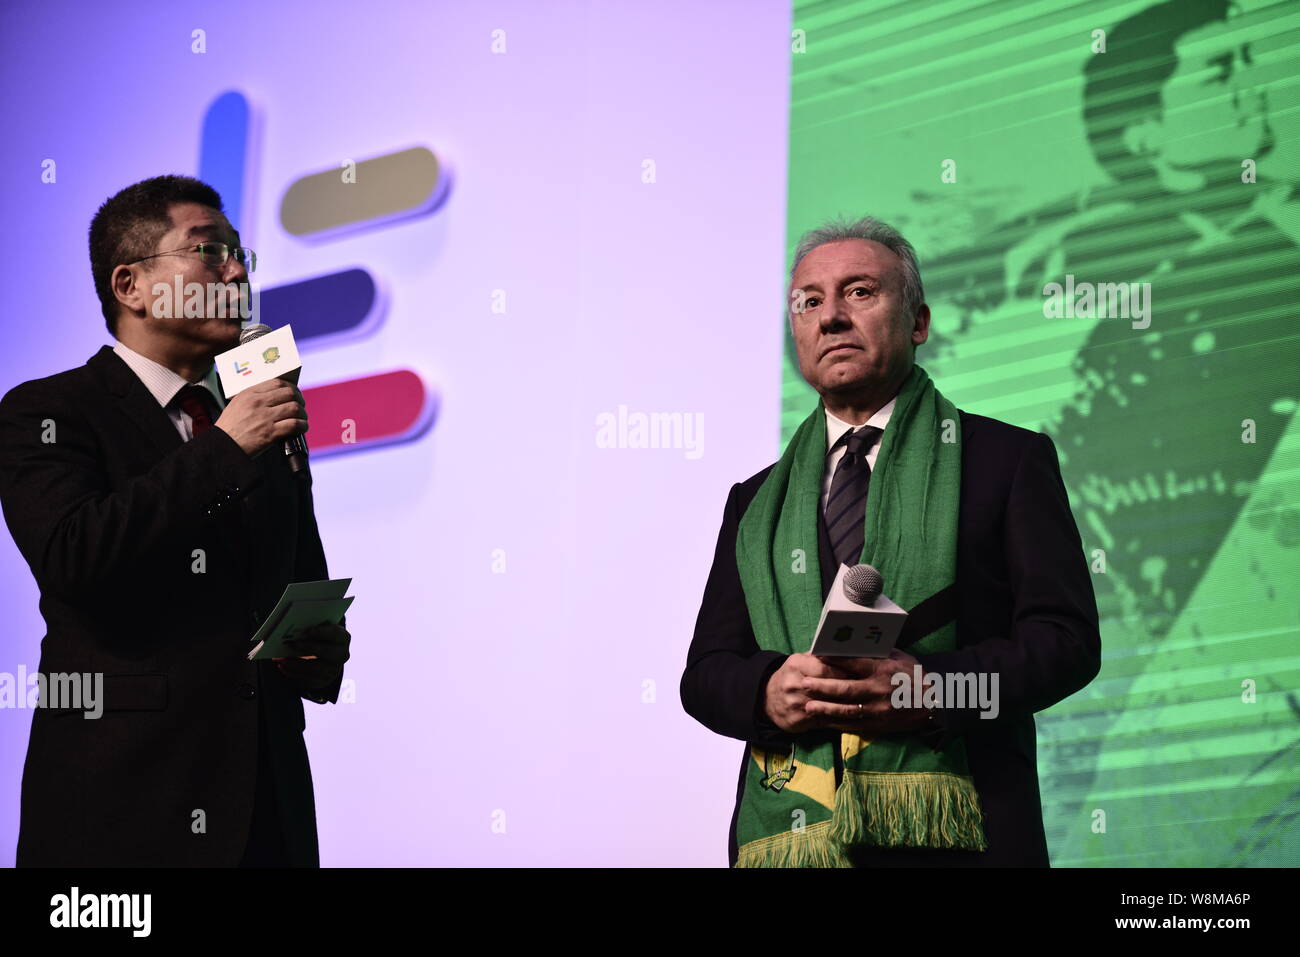 Head coach Alberto Zaccheroni, right, of Beijing Guoan F.C. attends a press conference to announce the strategic partnership between LeTV and Beijing Stock Photo